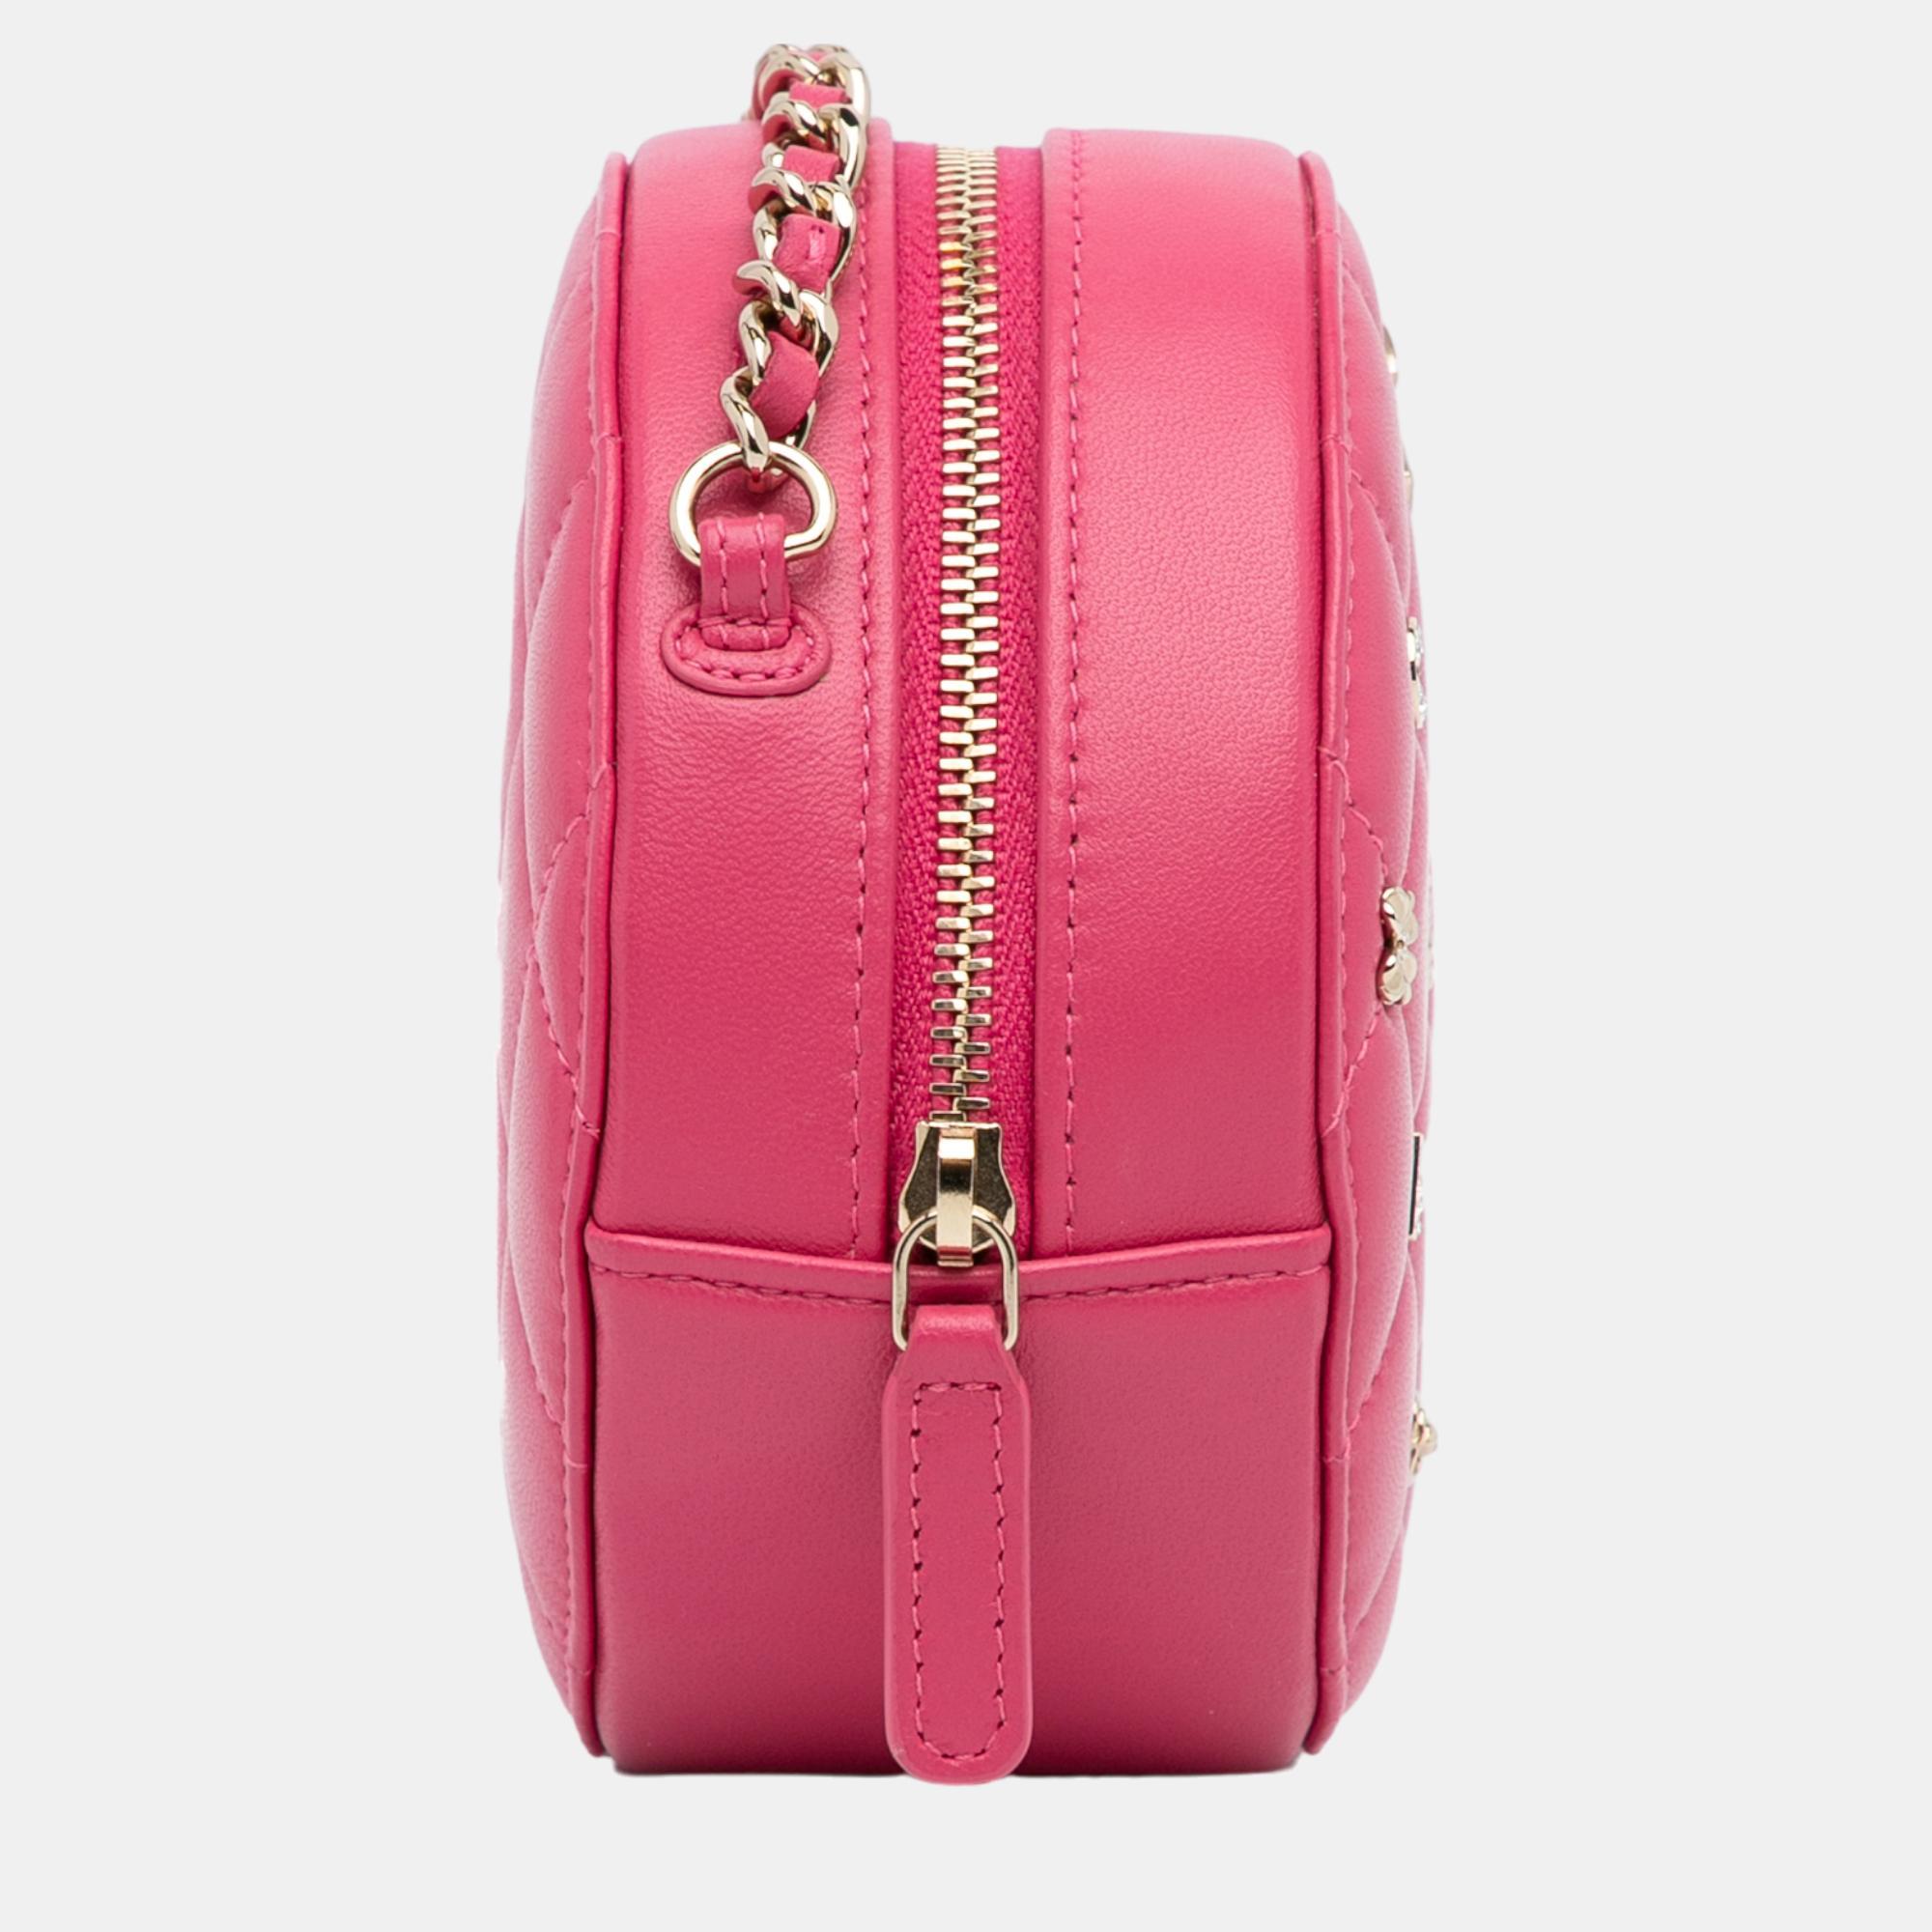 Chanel Pink Lucky Charms Round Crossbody Bag